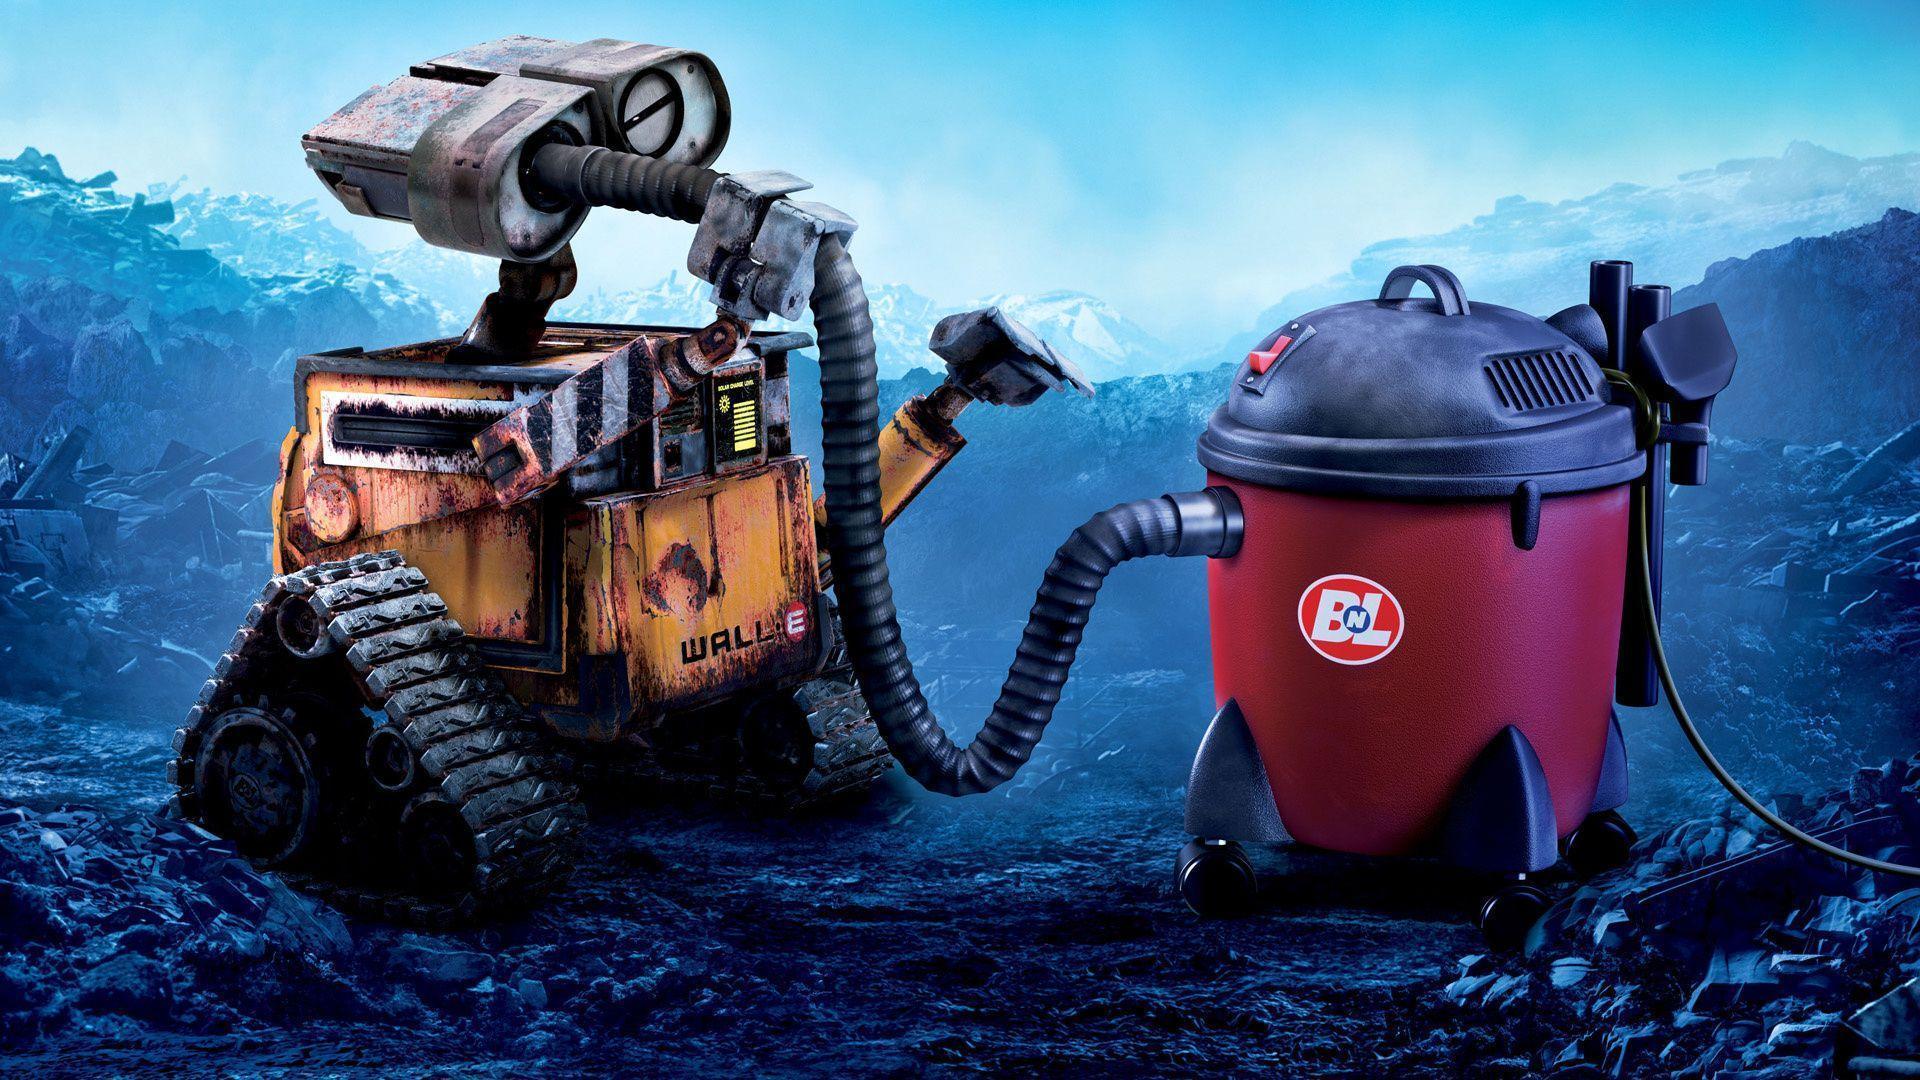 Walle wallpapers